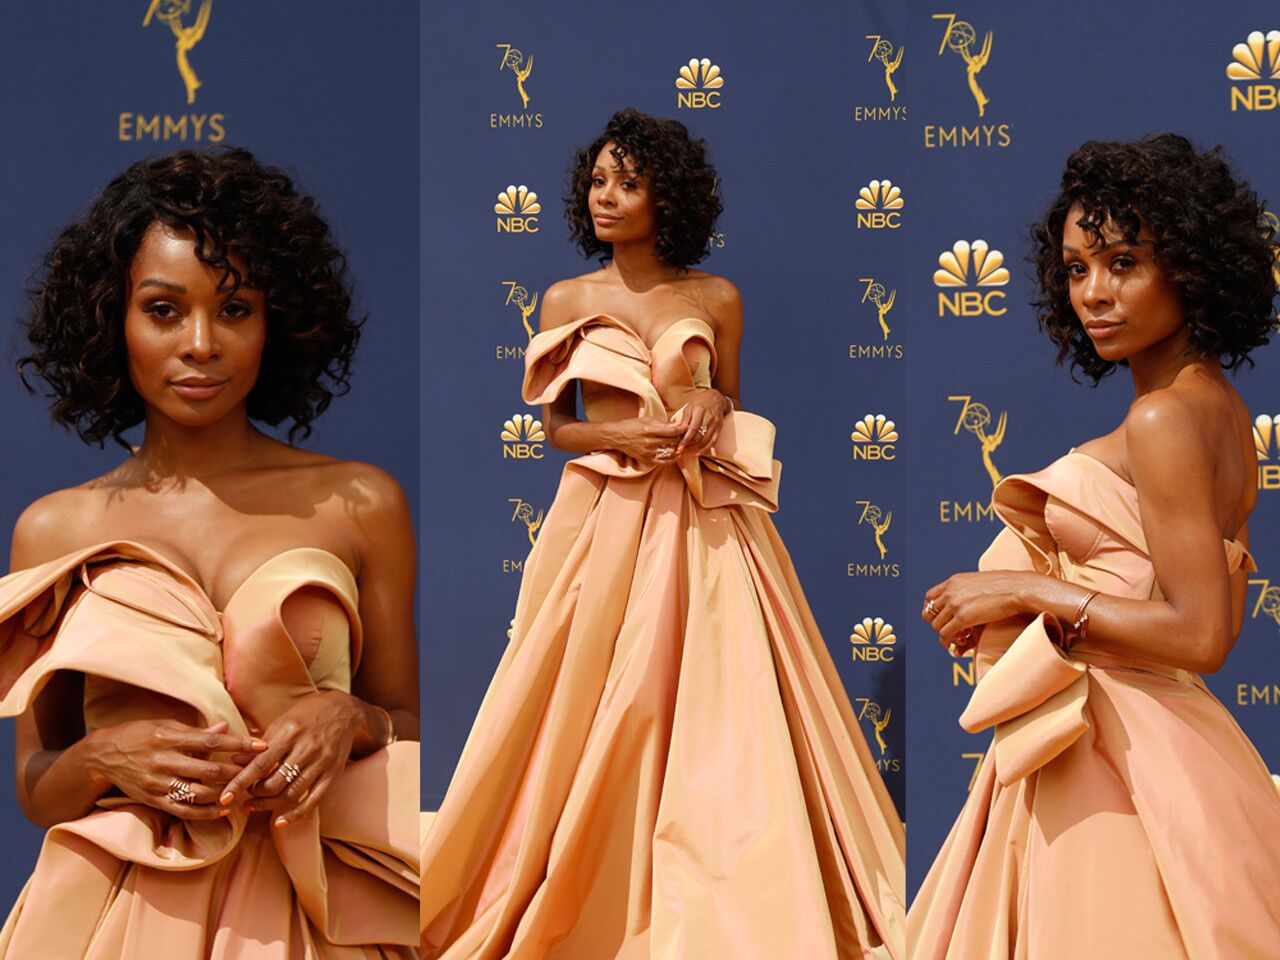 Zuri Hall certainly is making a statement with her Emmys look, but this one is a bit much. Her gown looks as if she was wrapped up in someone’s ‘80s living-room drapes. That's why she is on our worst-dressed list.